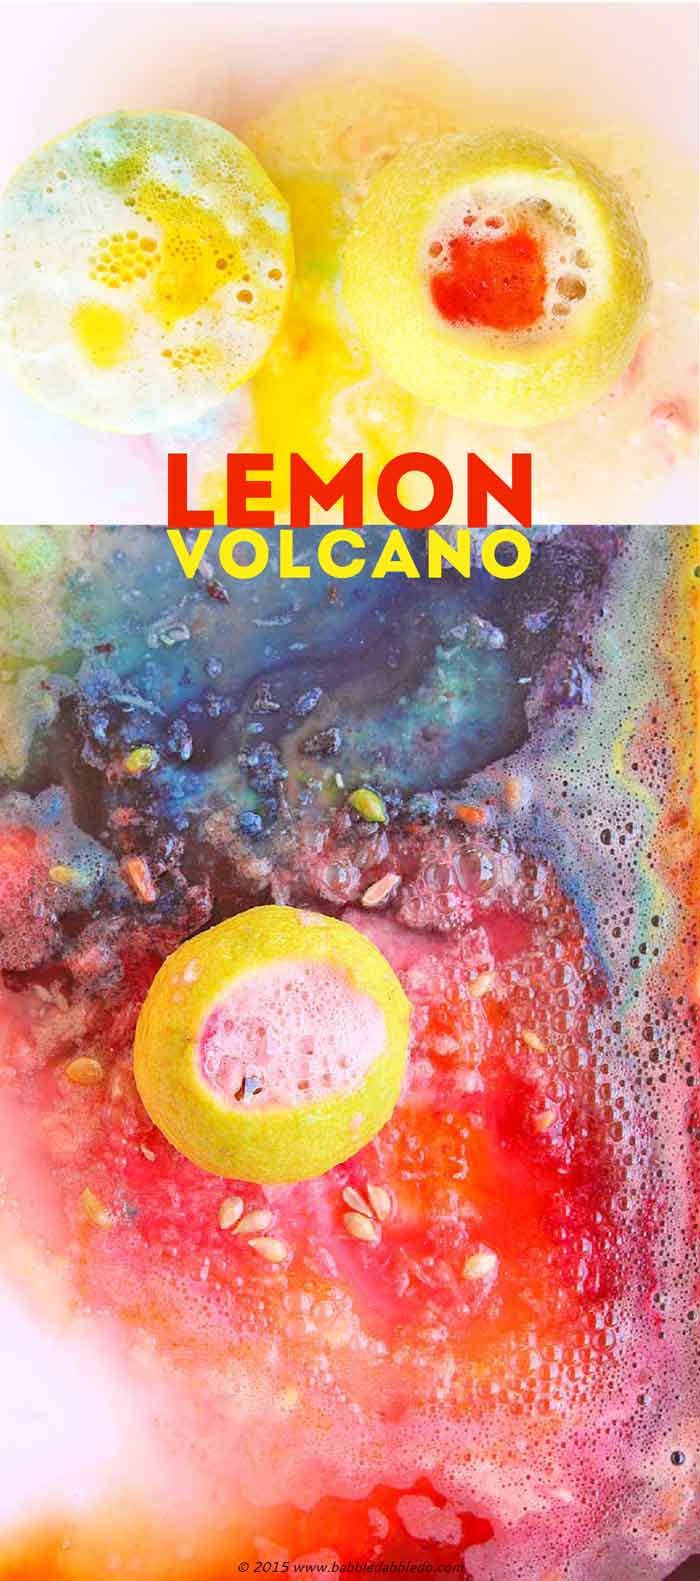 Try this easy science activity for kids: make lemon volcanoes and watch the chemical reaction of citric acid and baking soda.